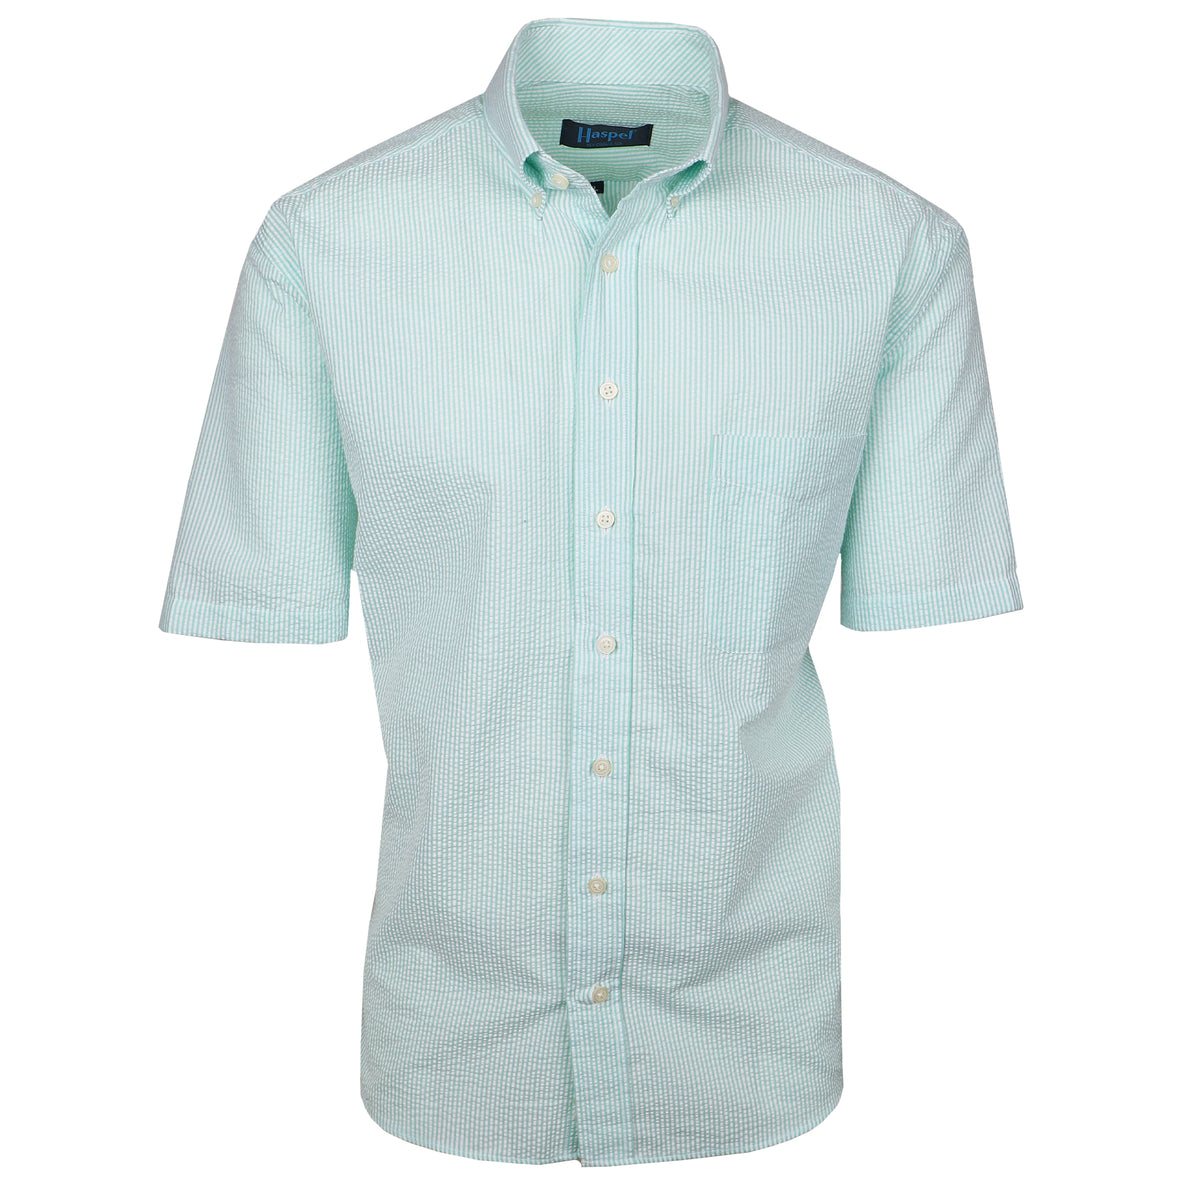 Seersucker all year long in a minty green seersucker shirt. Subtle, lightweight, and a texture they begs a second look.  100% Cotton Seersucker • Spread Collar • Short Sleeve • Chest Pocket • Machine Washable • Made in Italy